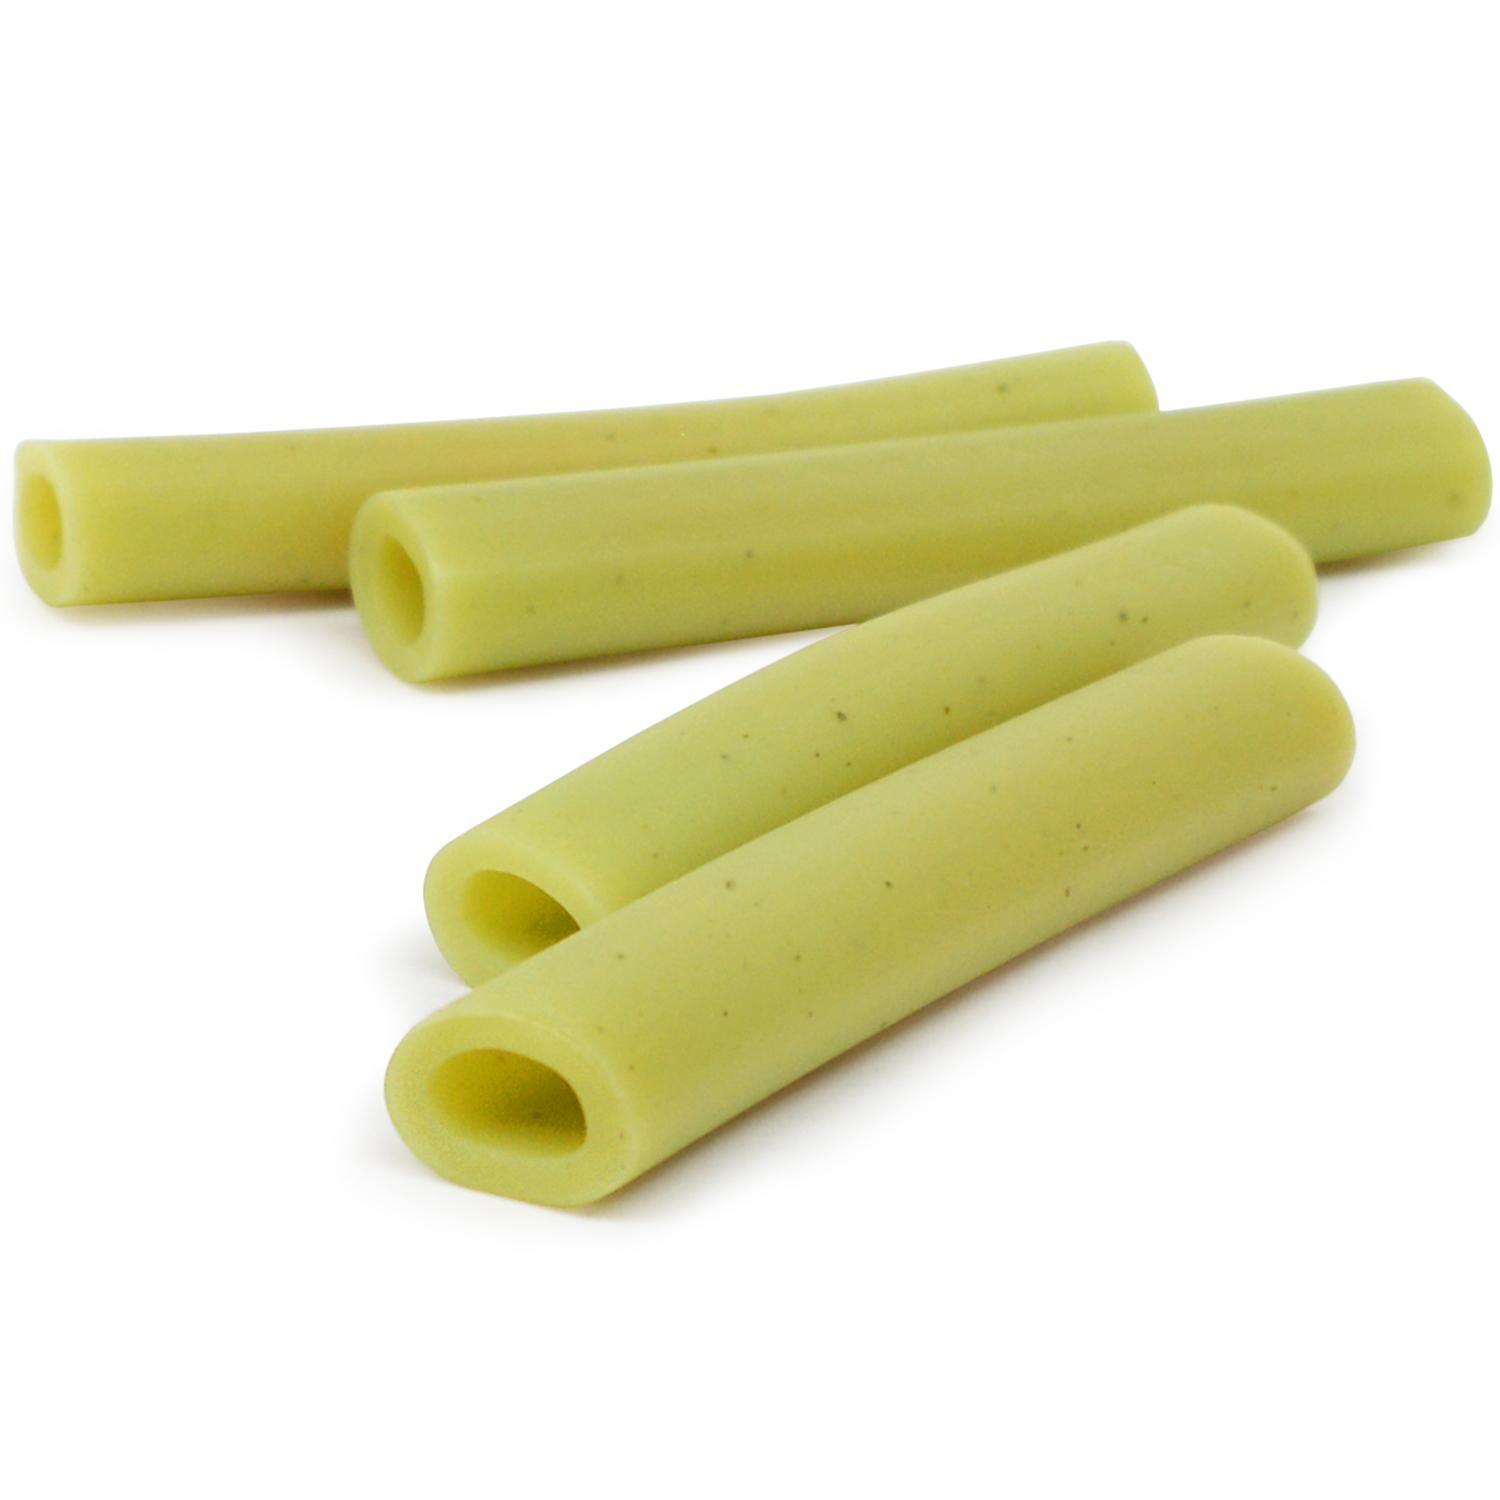 Pawtato Seaweed Tubes Vegan Dog Chews out of the pack